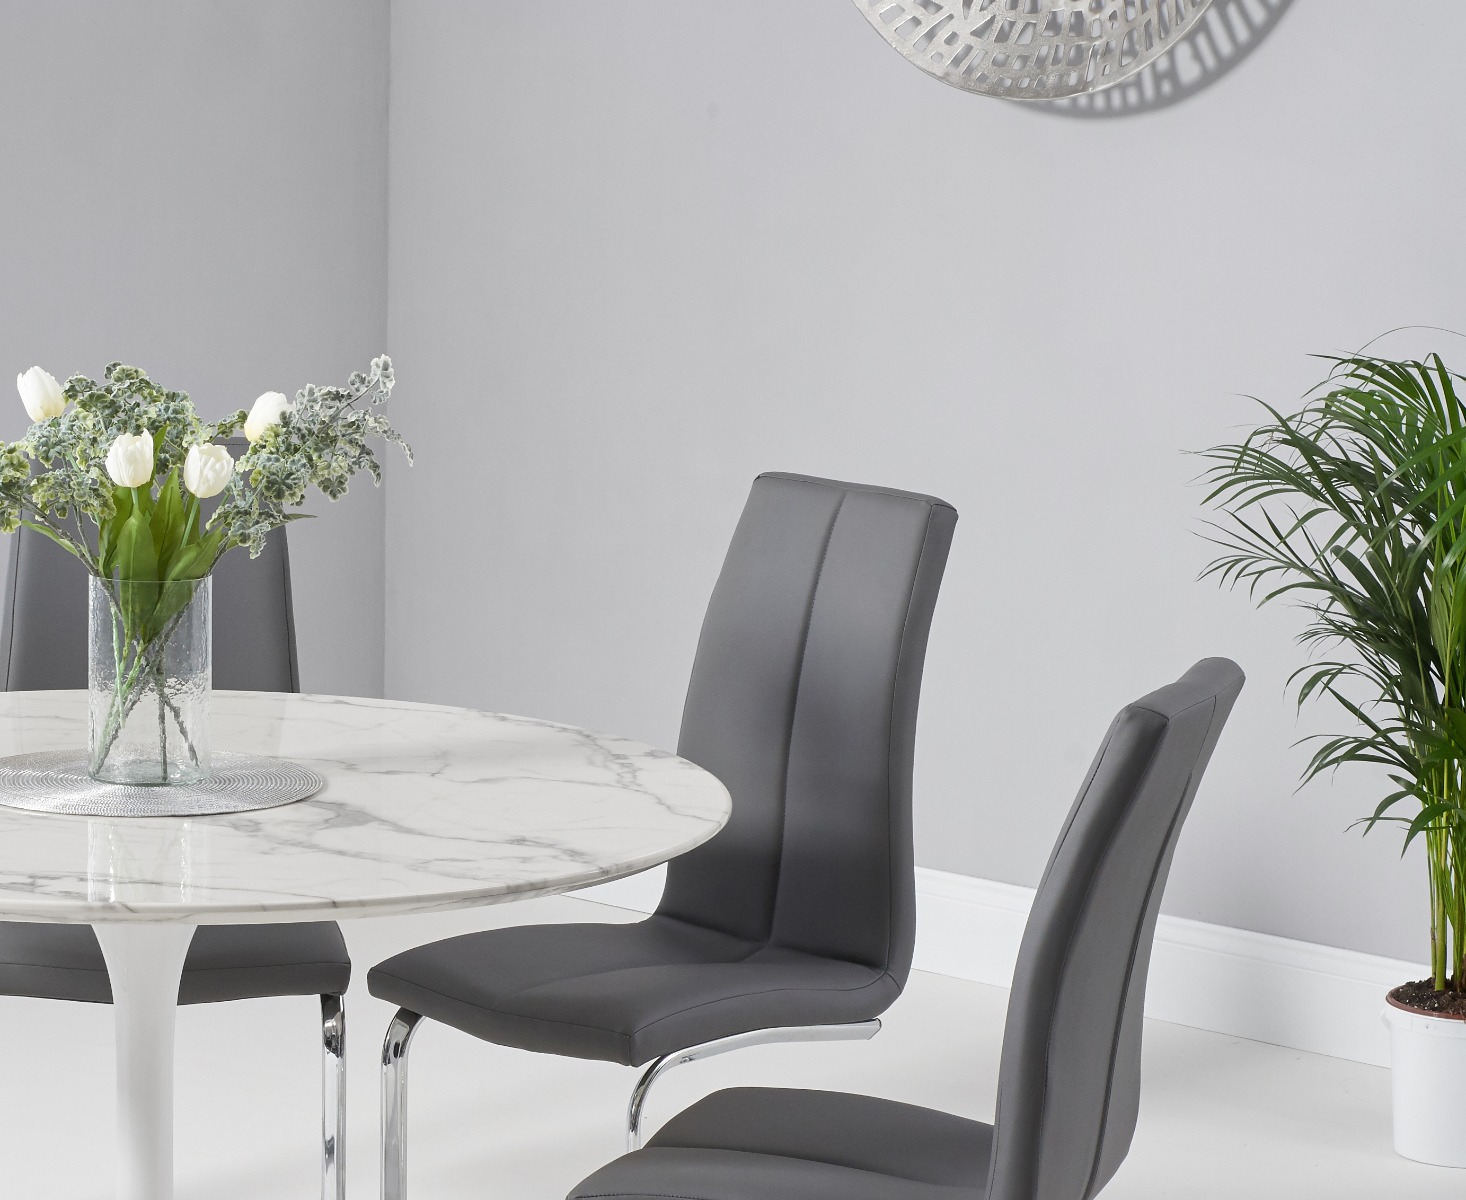 Photo 2 of Brighton 120cm round marble white dining table with 2 grey gianni chairs